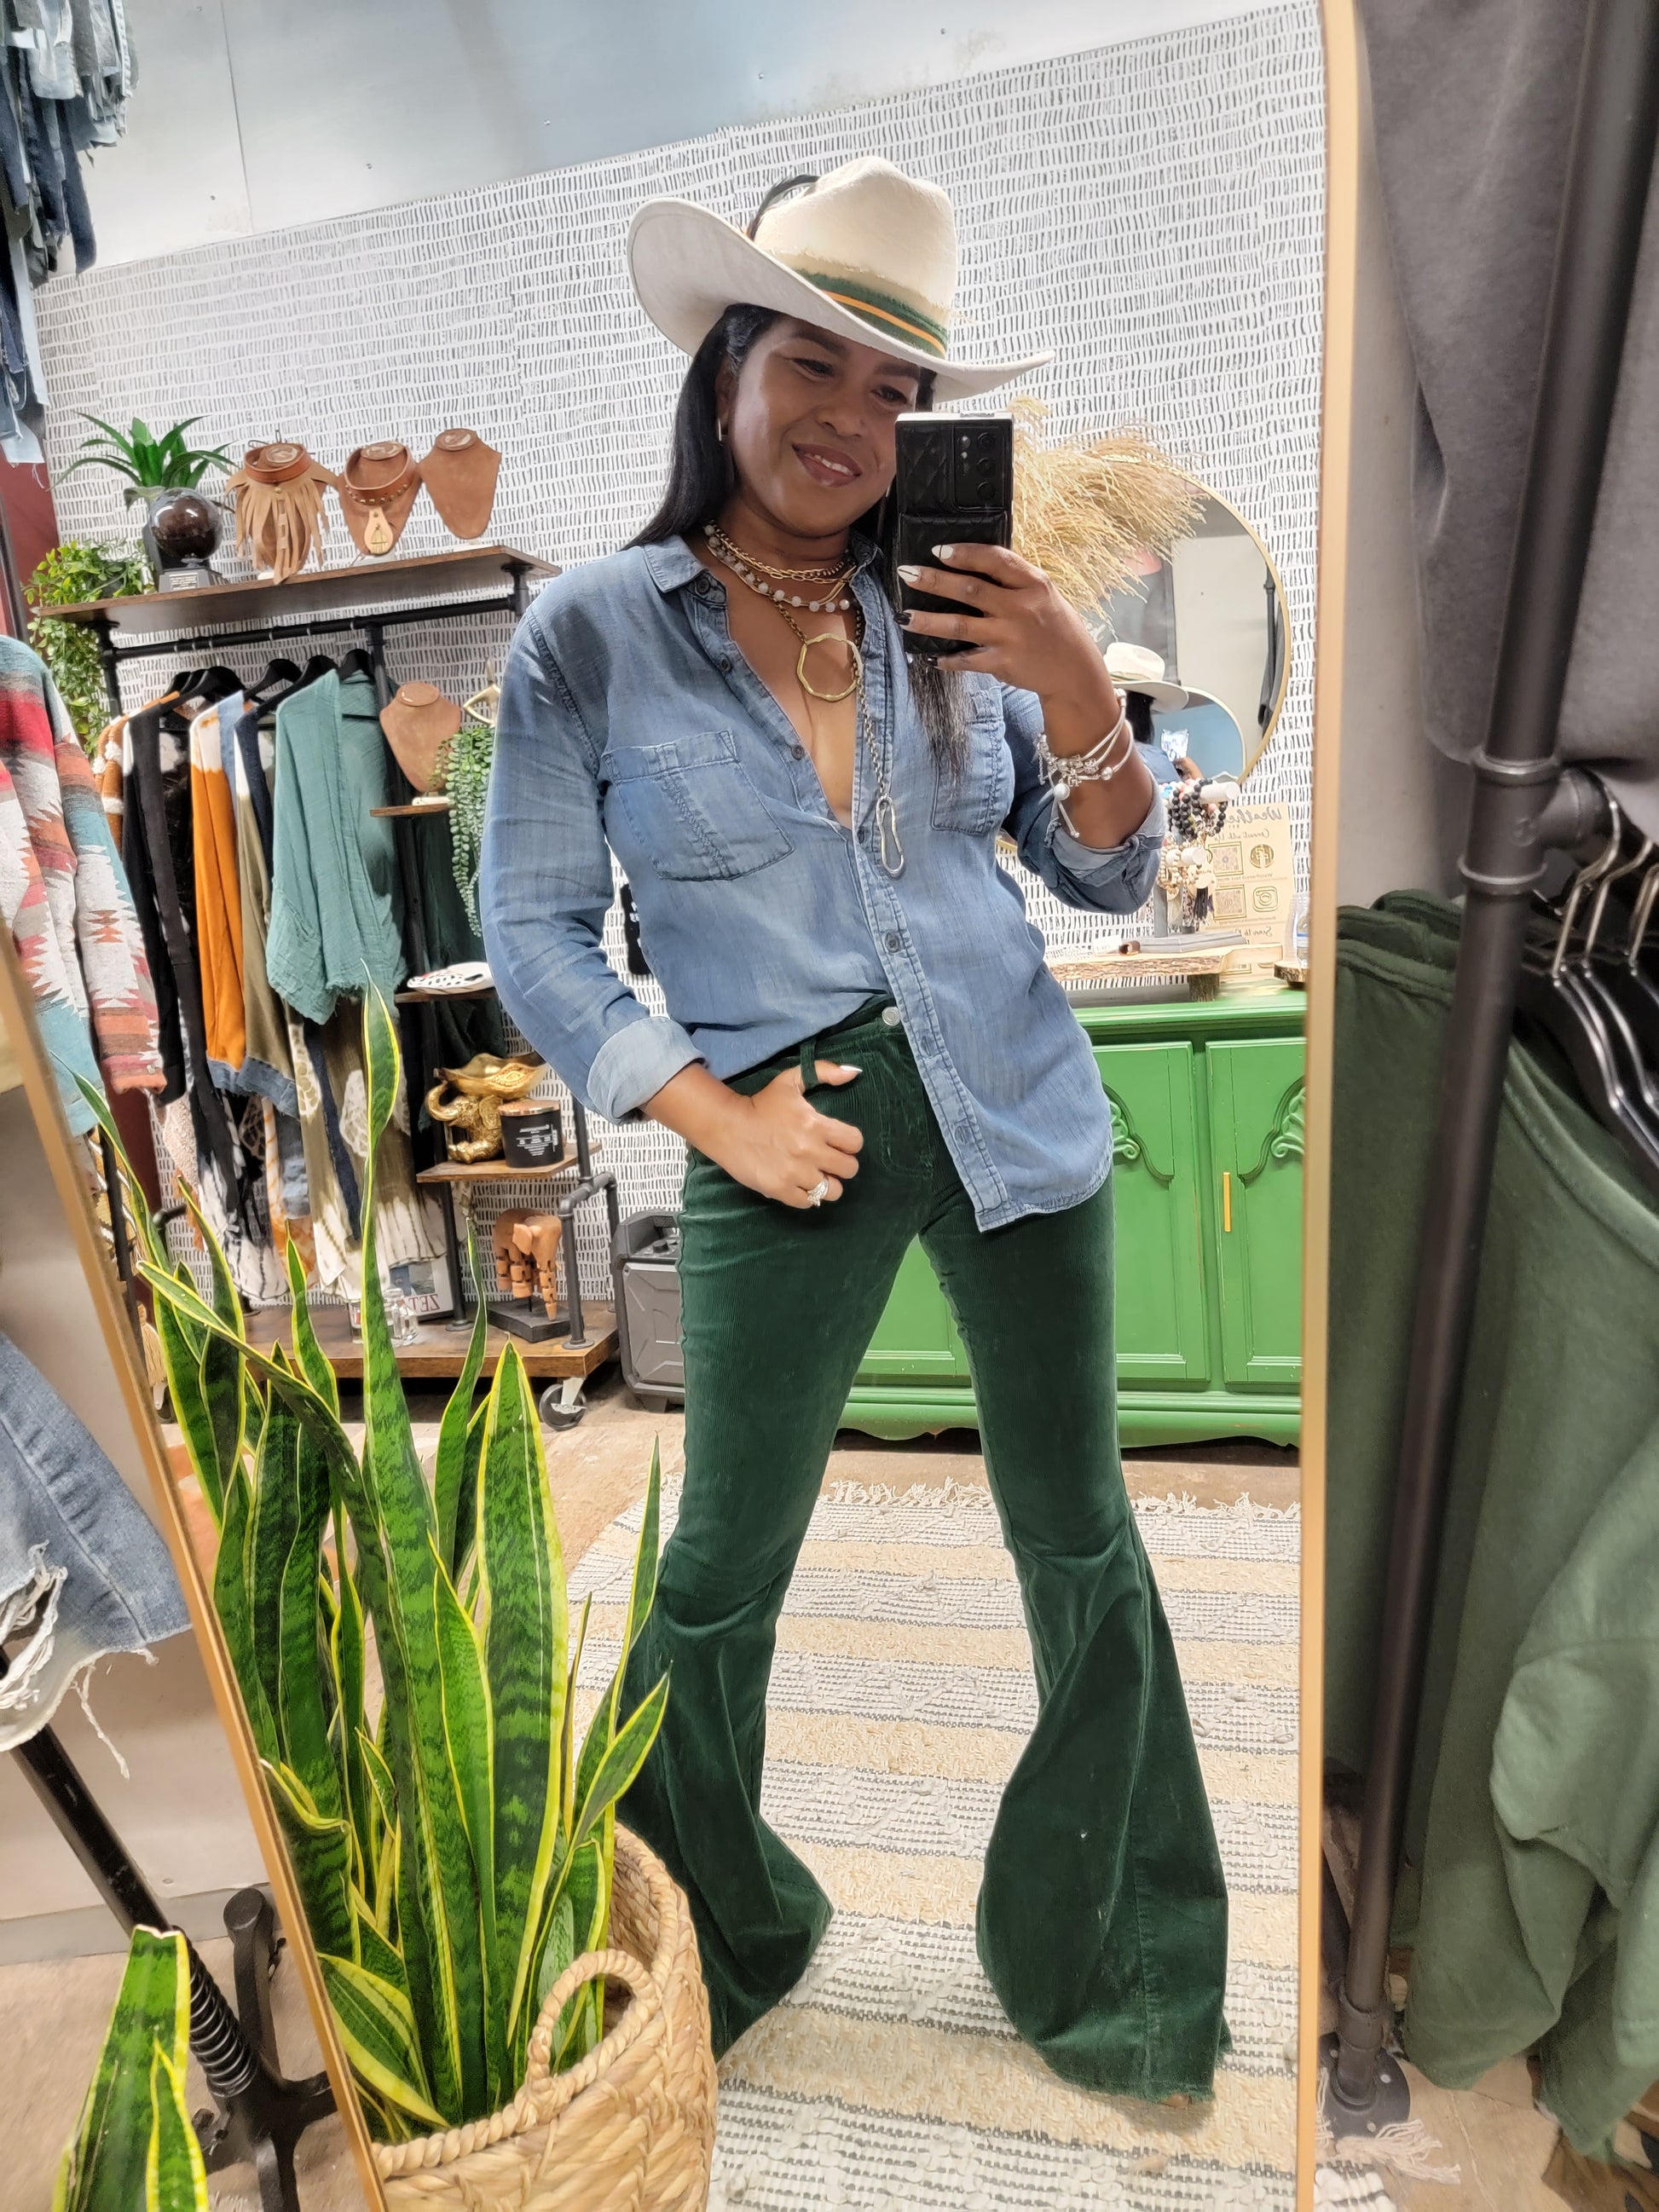 Green Flare Pants Outfit